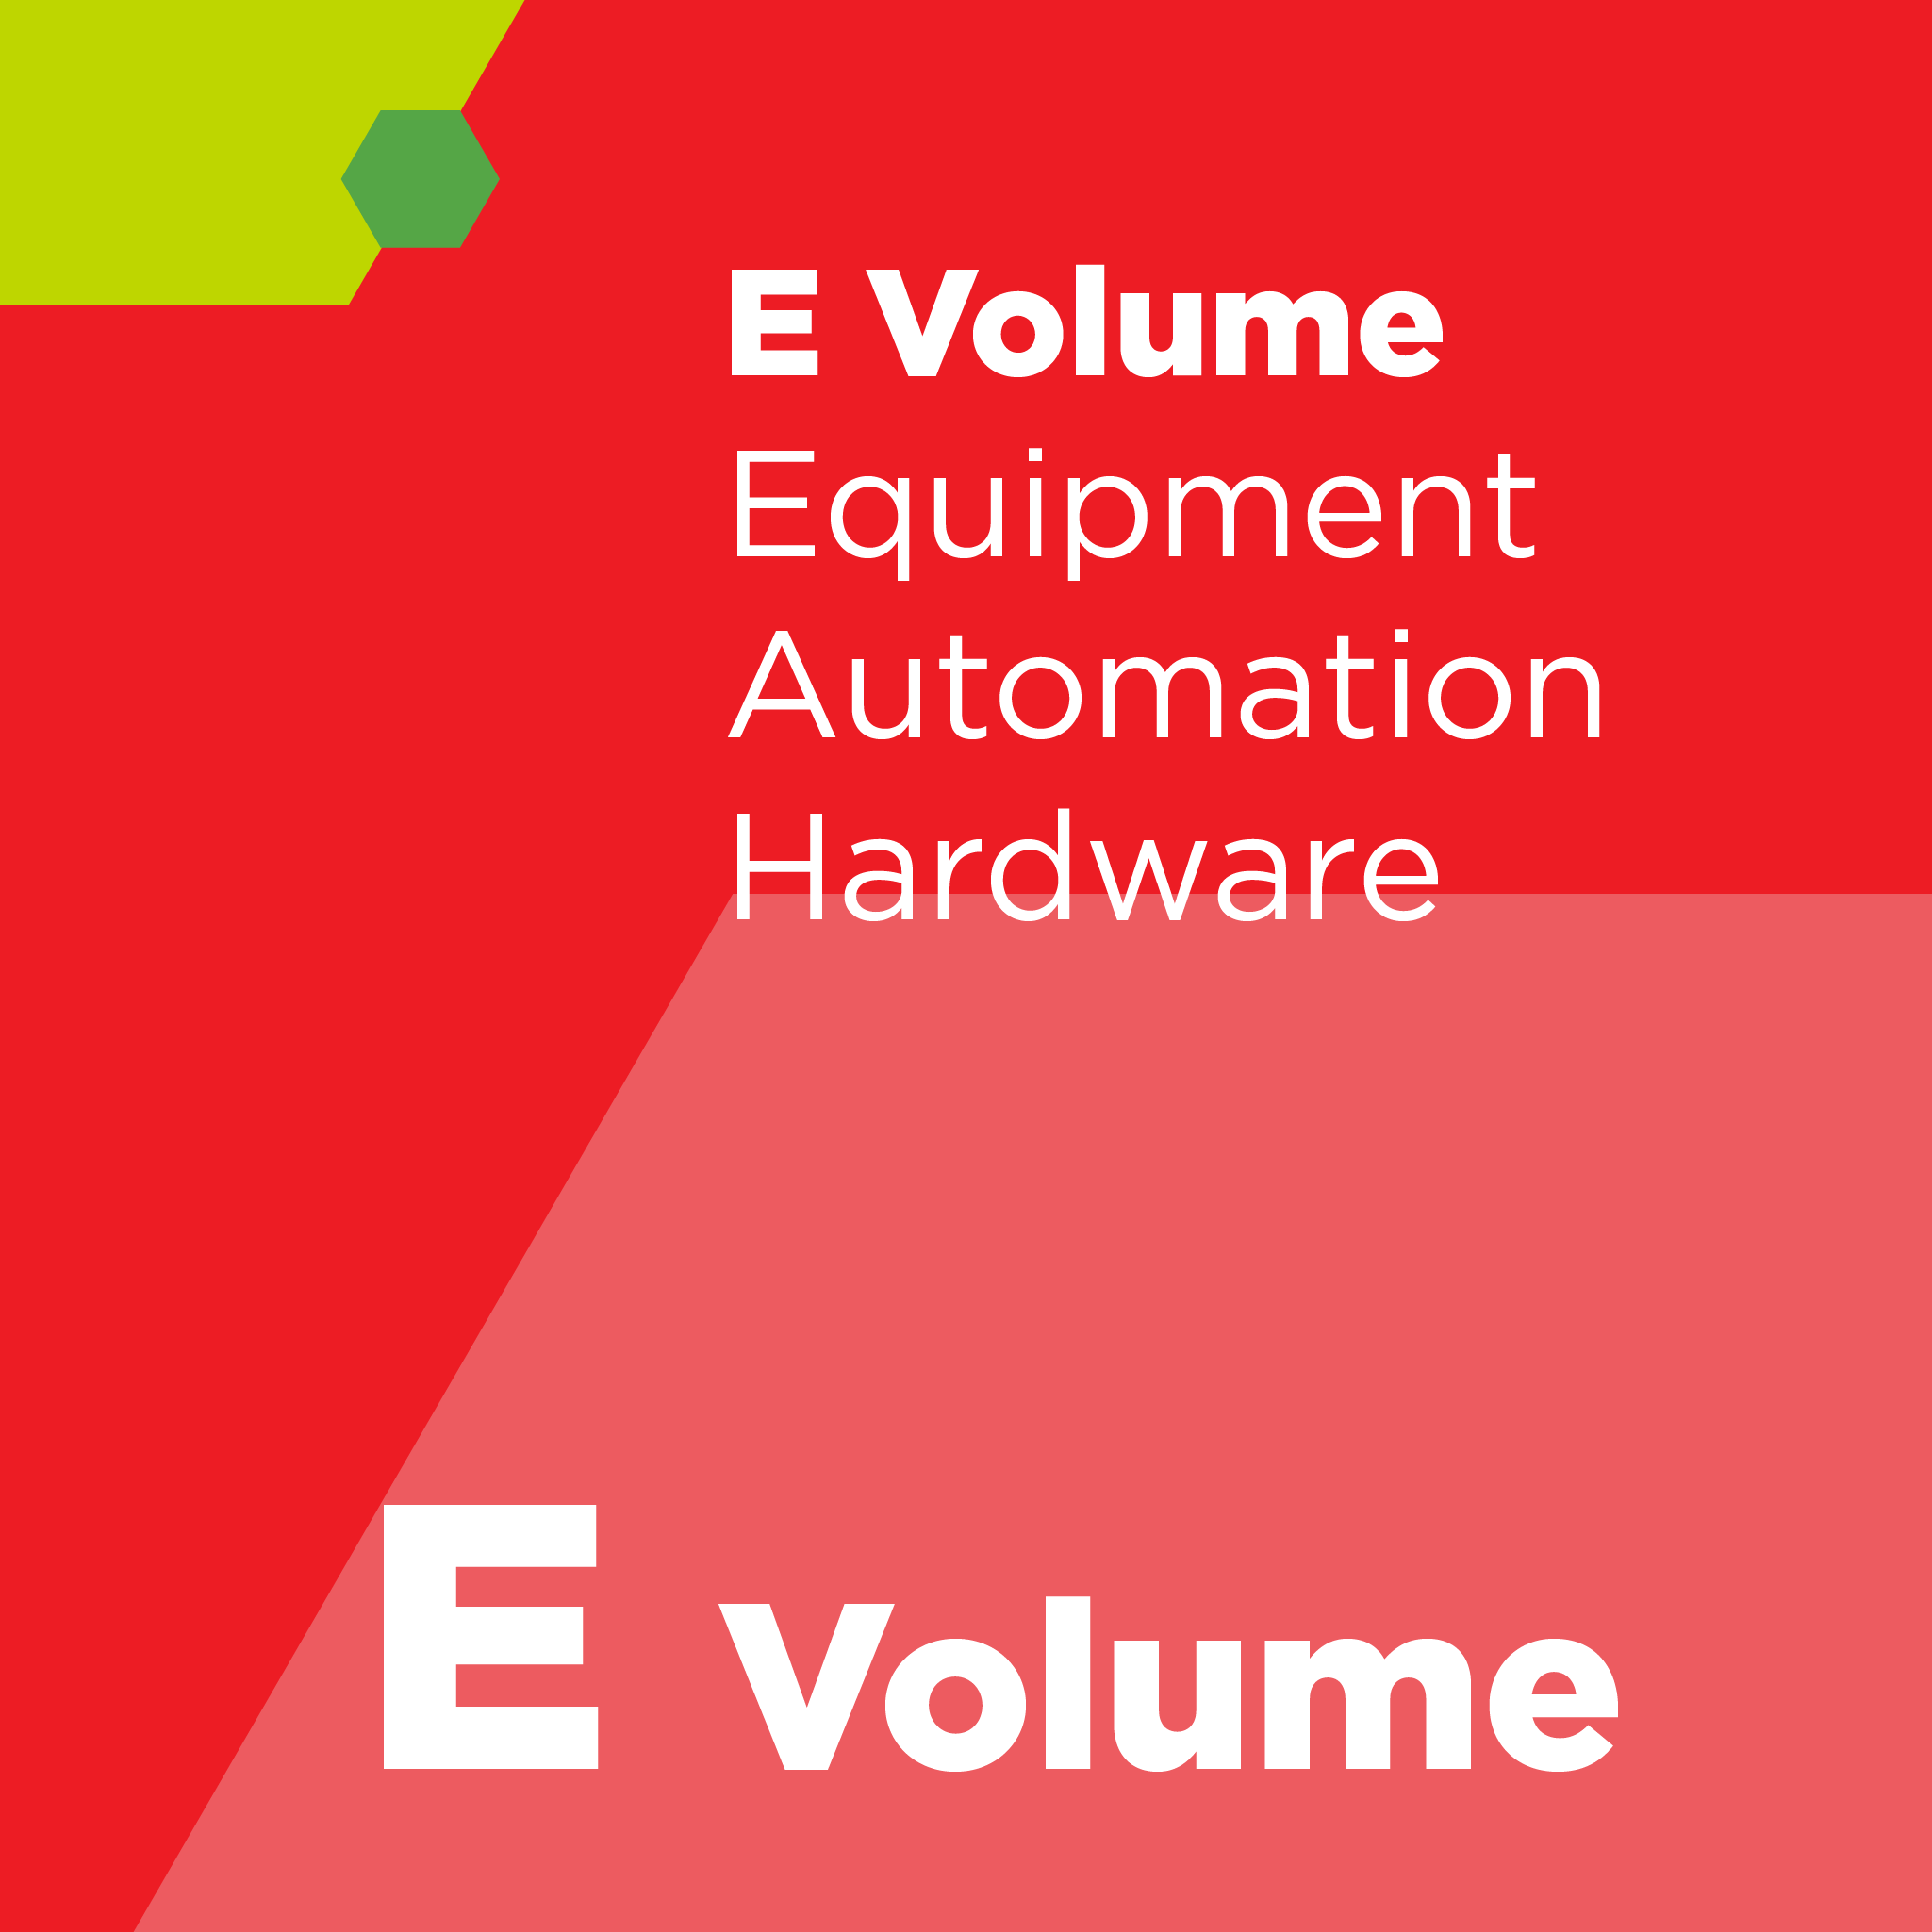 E04800 - SEMI E48 - Specification for SMIF Indexer Volume Requirement